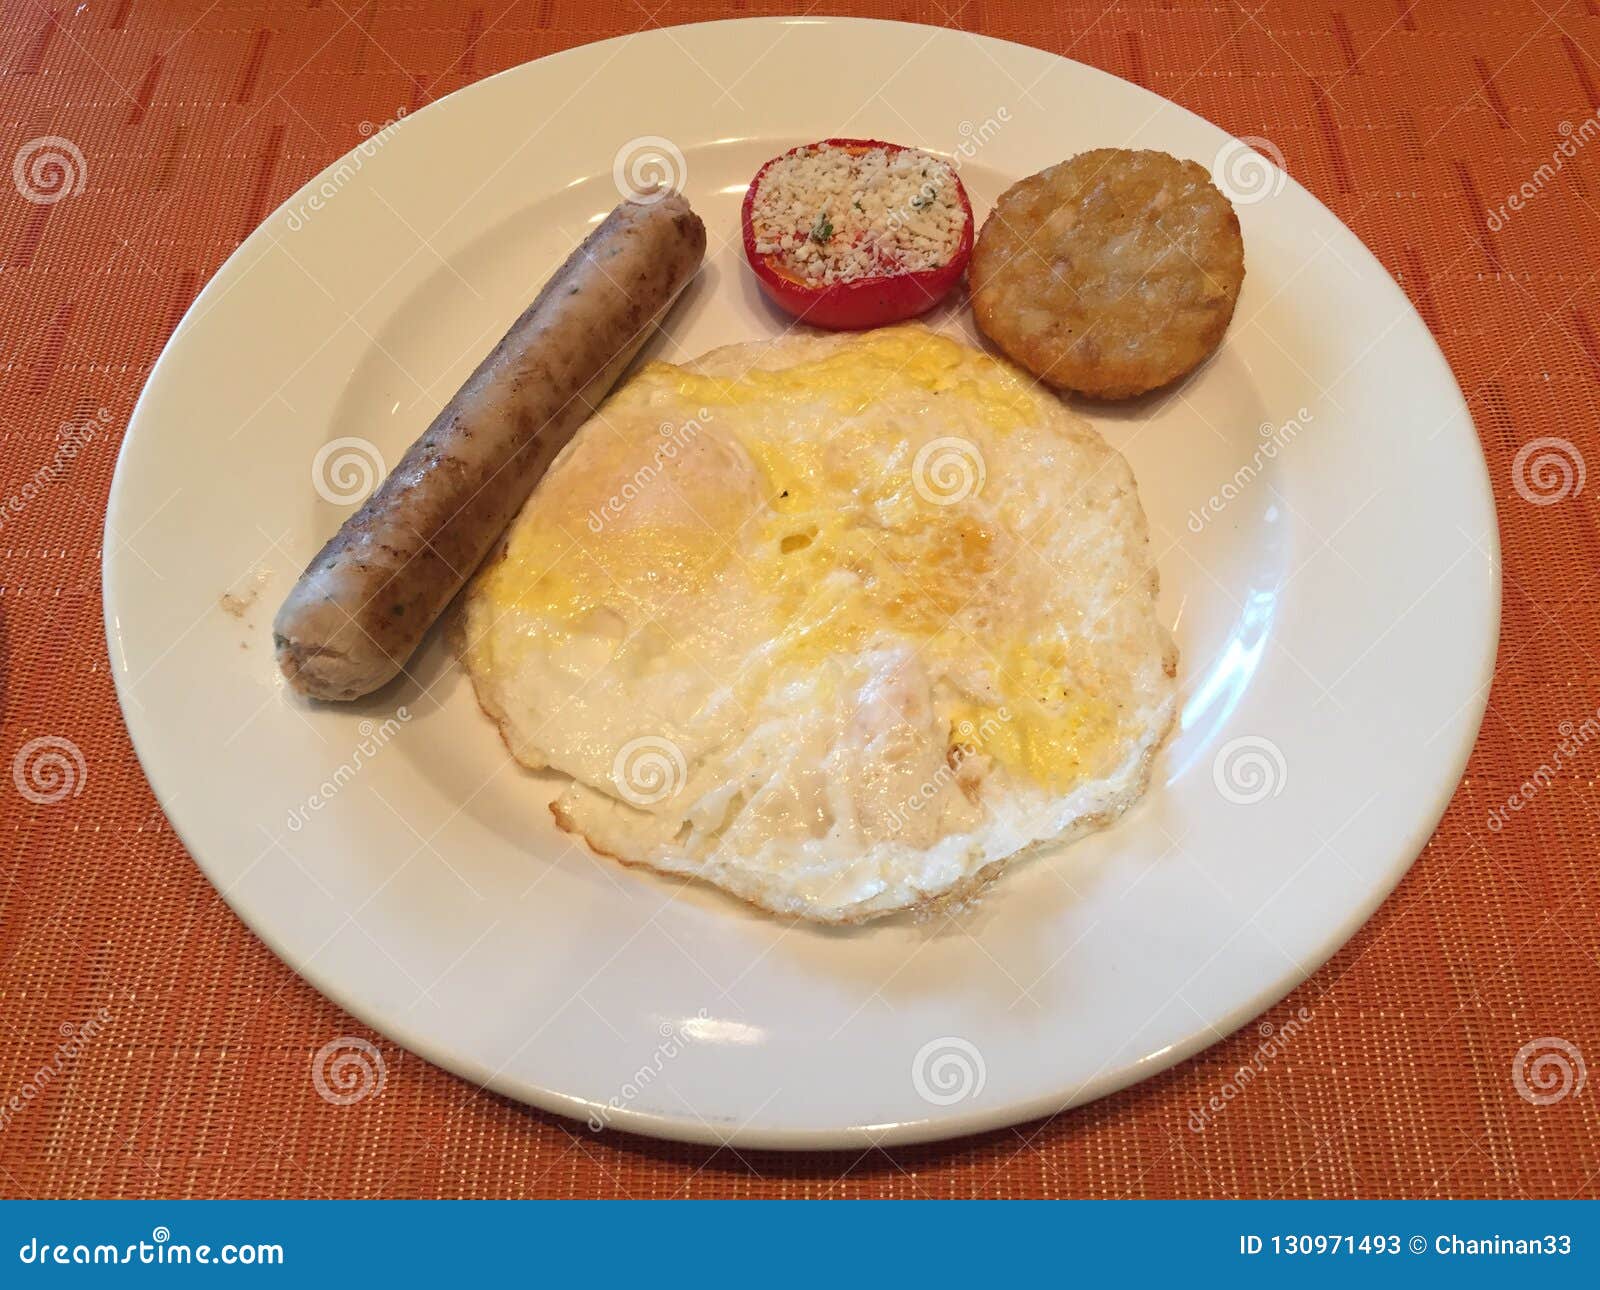 Western Style Breakfast is Common Stock Image - Image of western, style